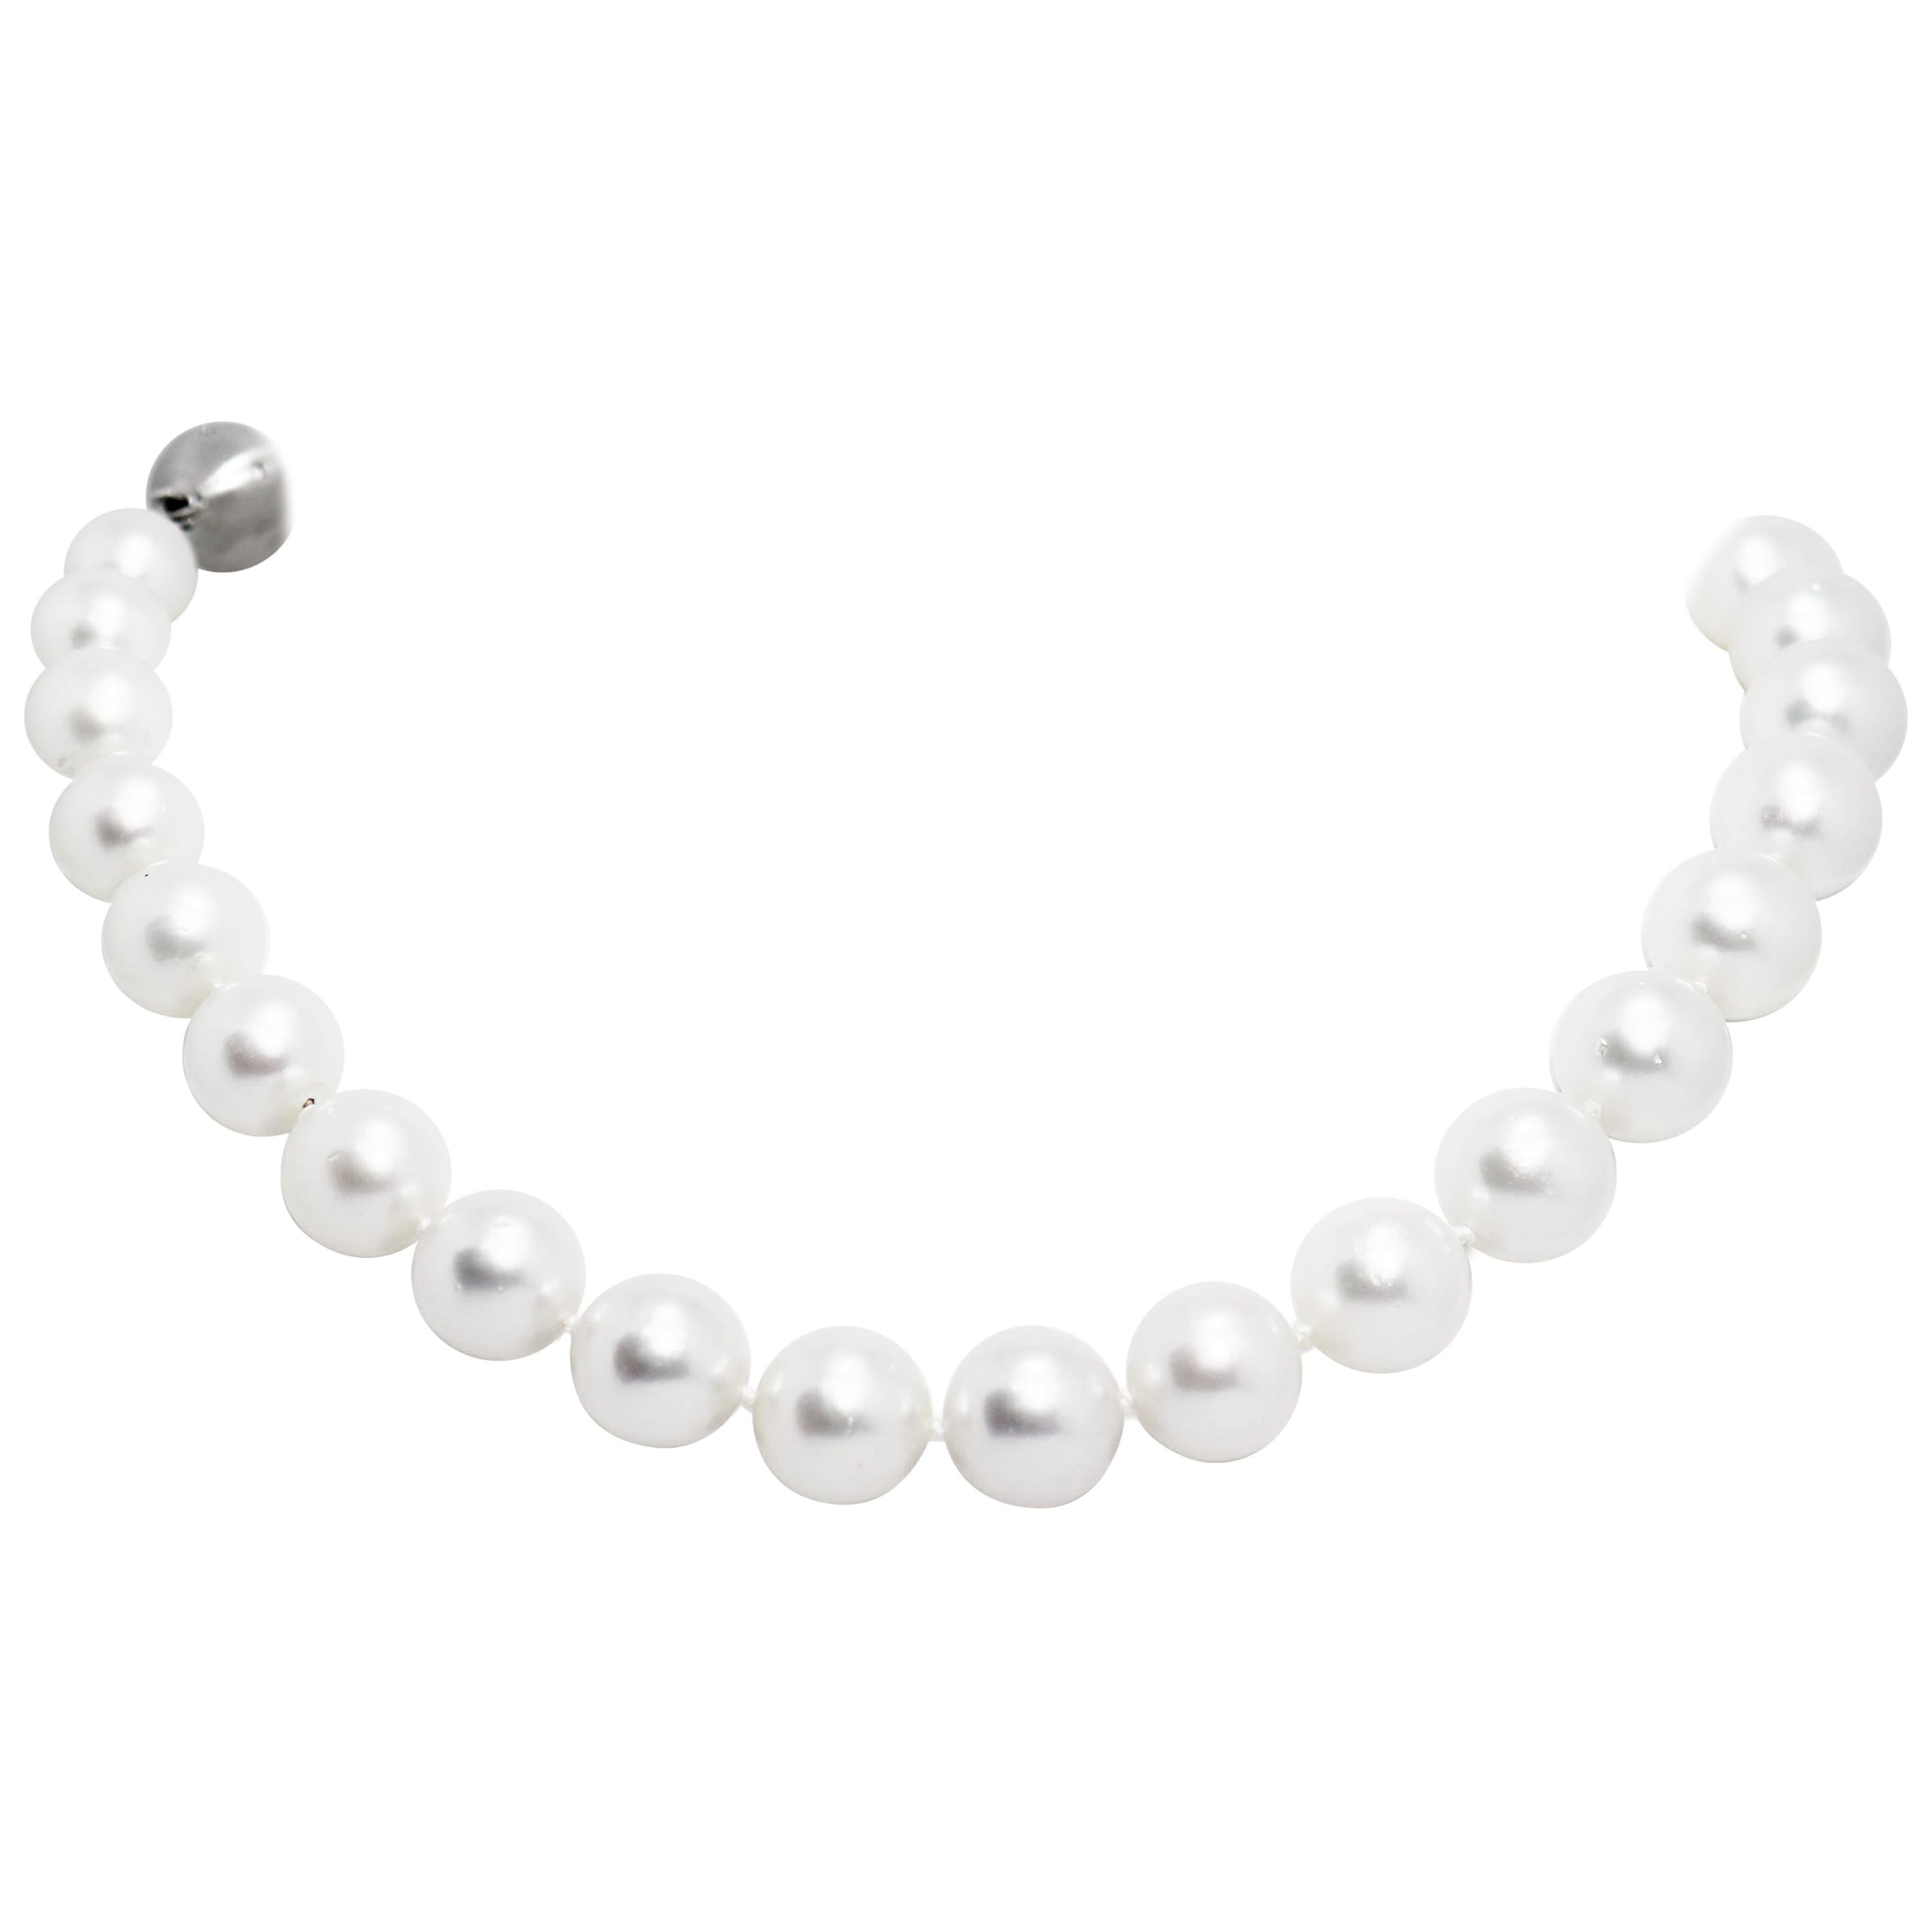 South Sea Pearl Necklace Featuring an 18 Carat Gold and Diamond Clasp